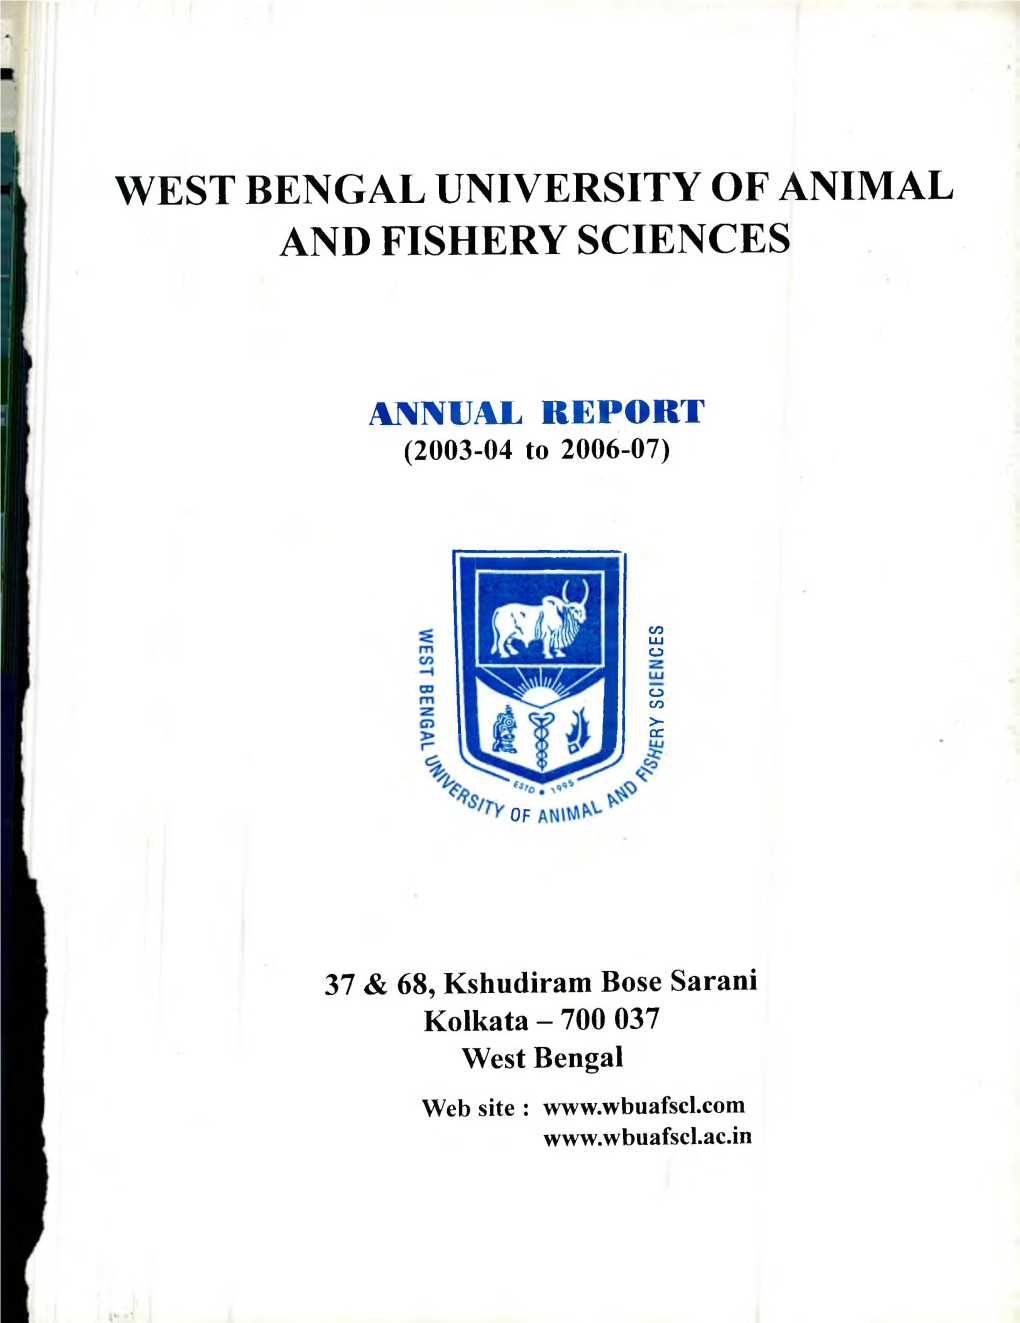 ANNUAL REPORT (2003-04 to 2006-07)